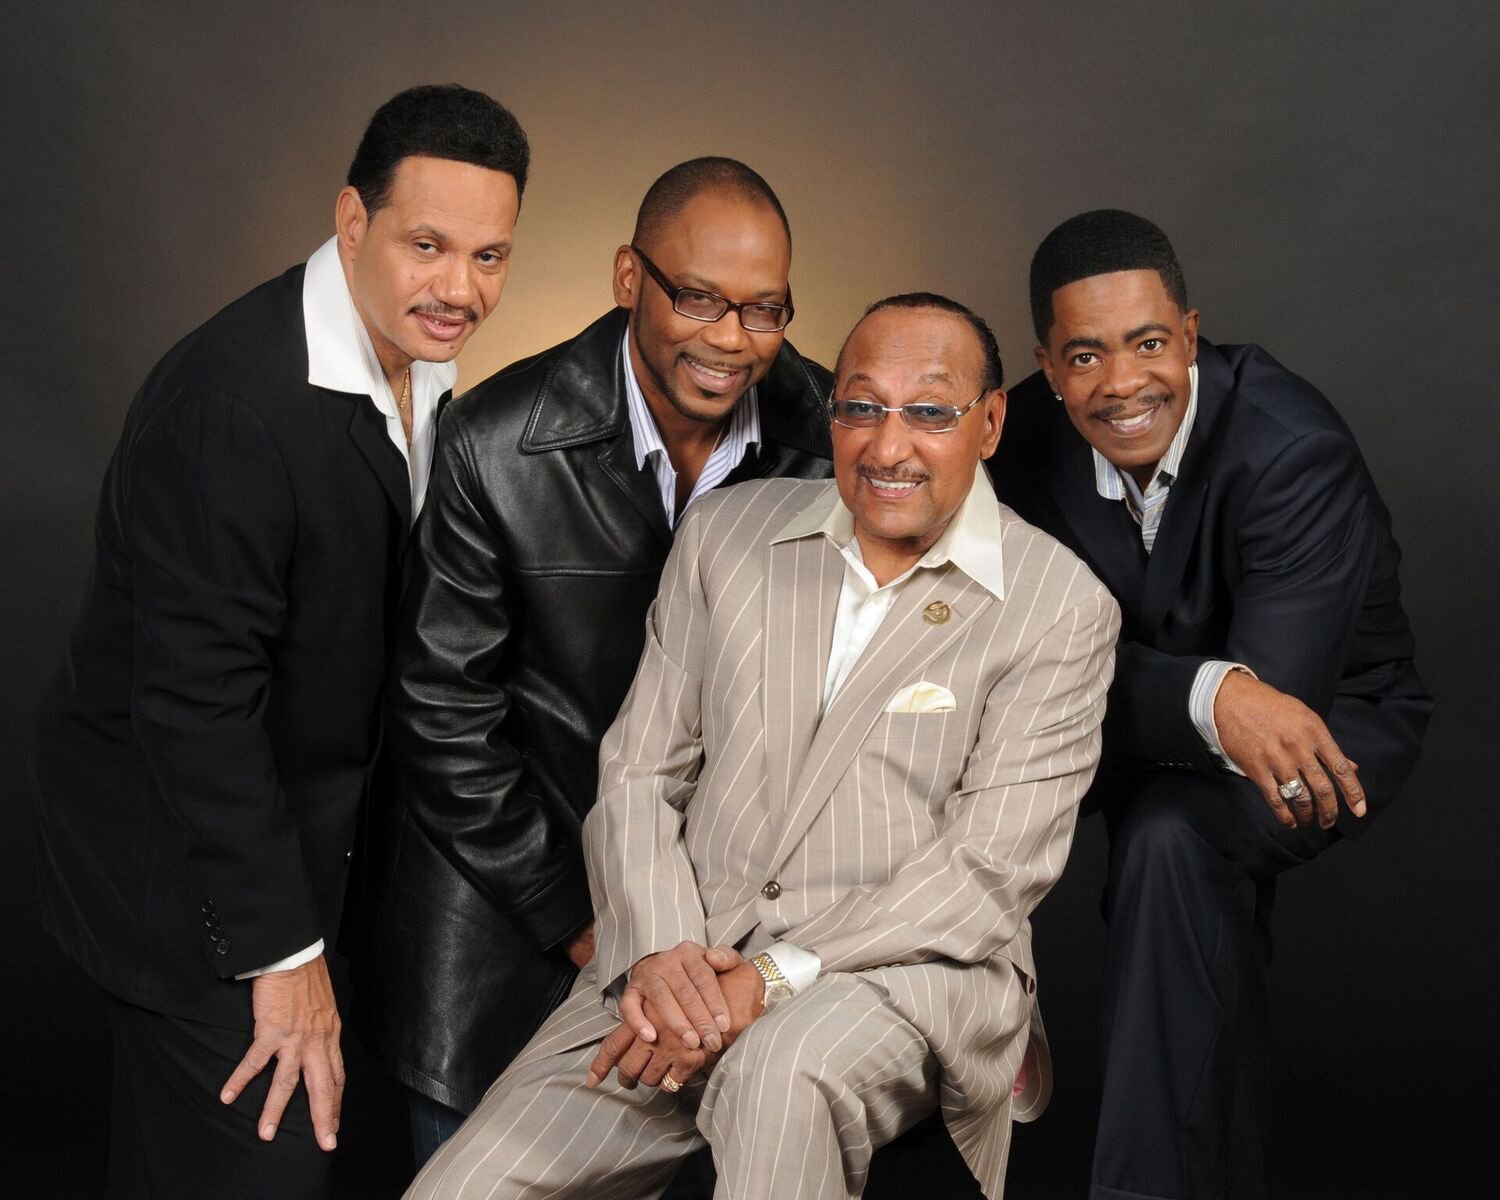 The Four Tops & The Temptations Announce UK Arena Tour in November 2018